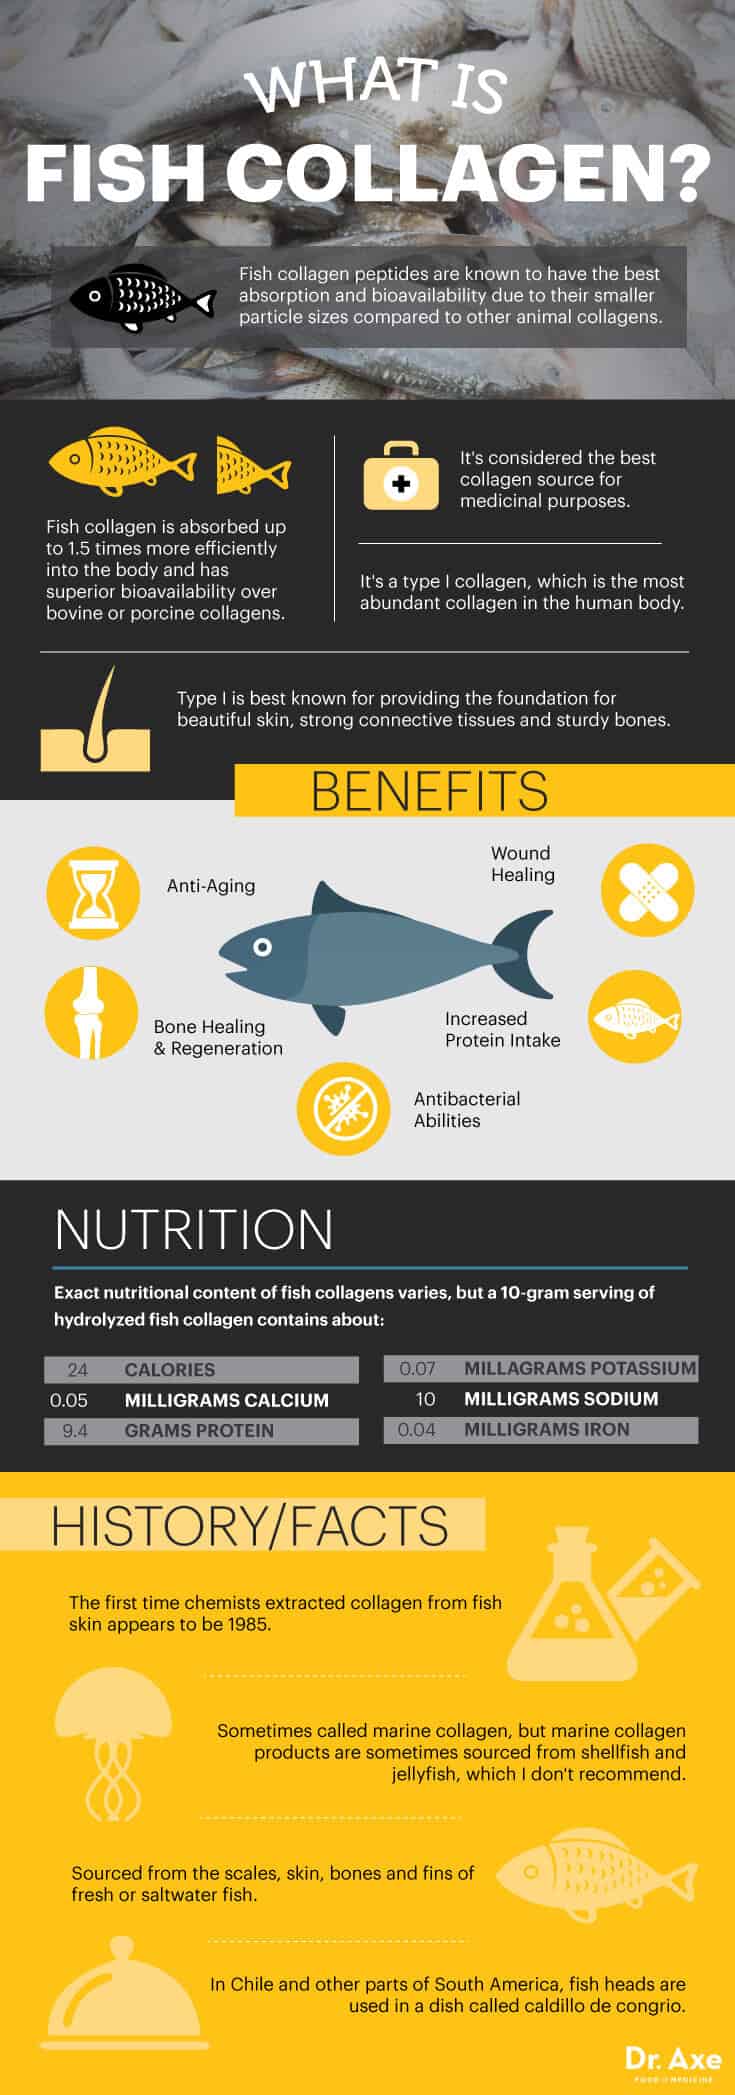 What is fish collagen? - Dr. Axe